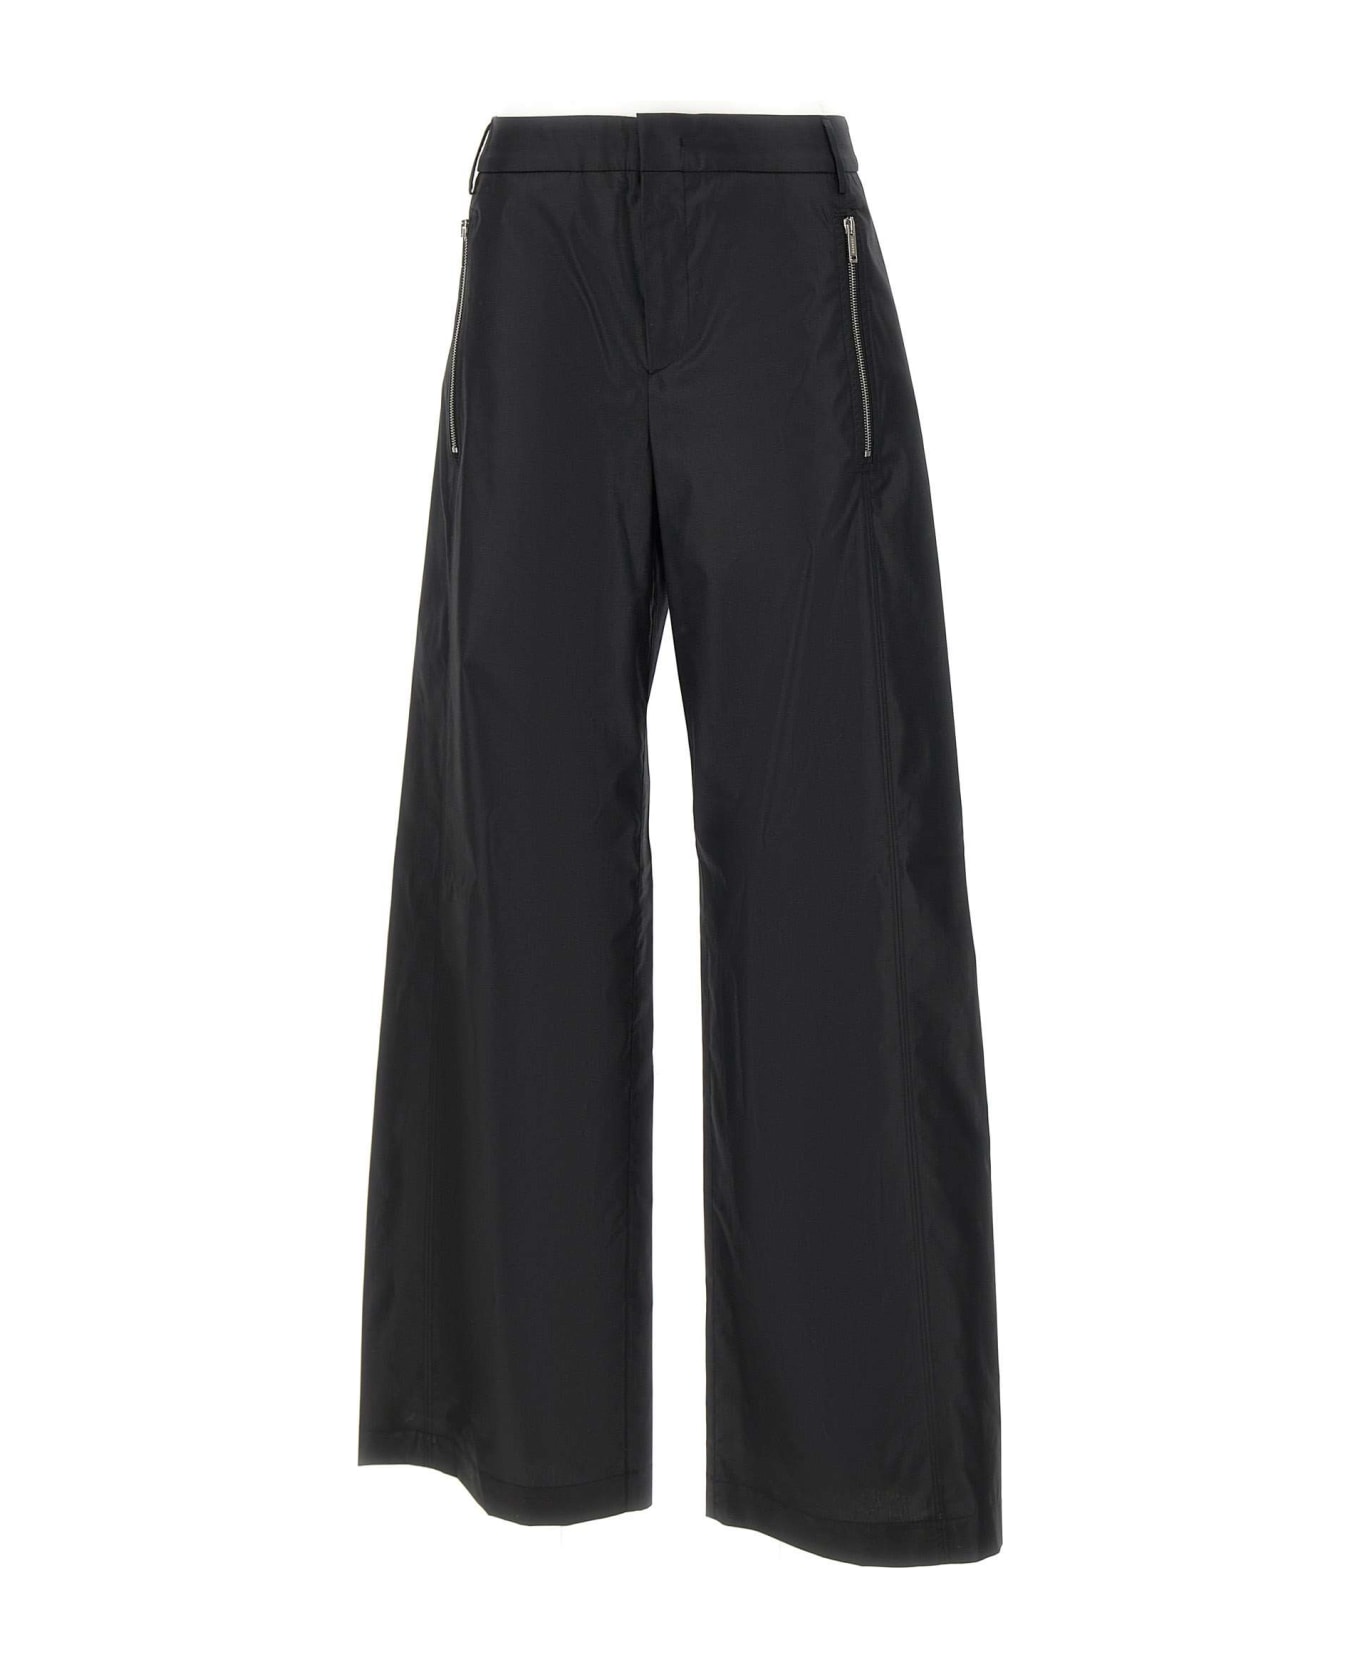 Iceberg Cinched Cotton Trousers - BLACK